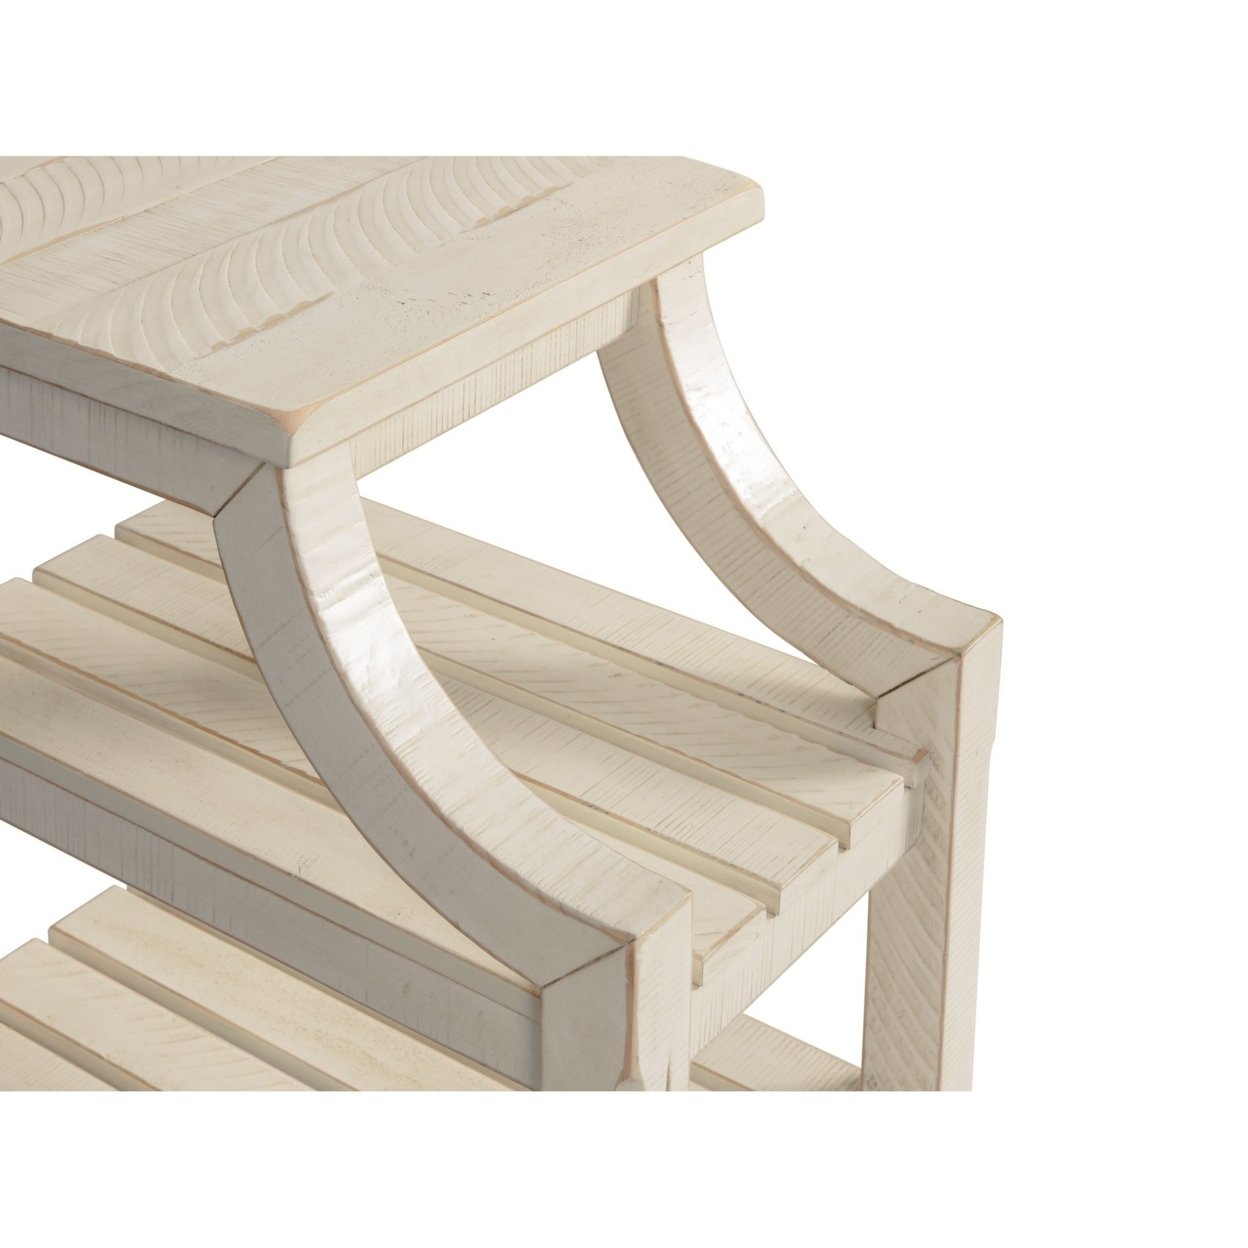 Chairside Table With 2 Slatted Shelves And Chiseled Edges, White- Saltoro Sherpi